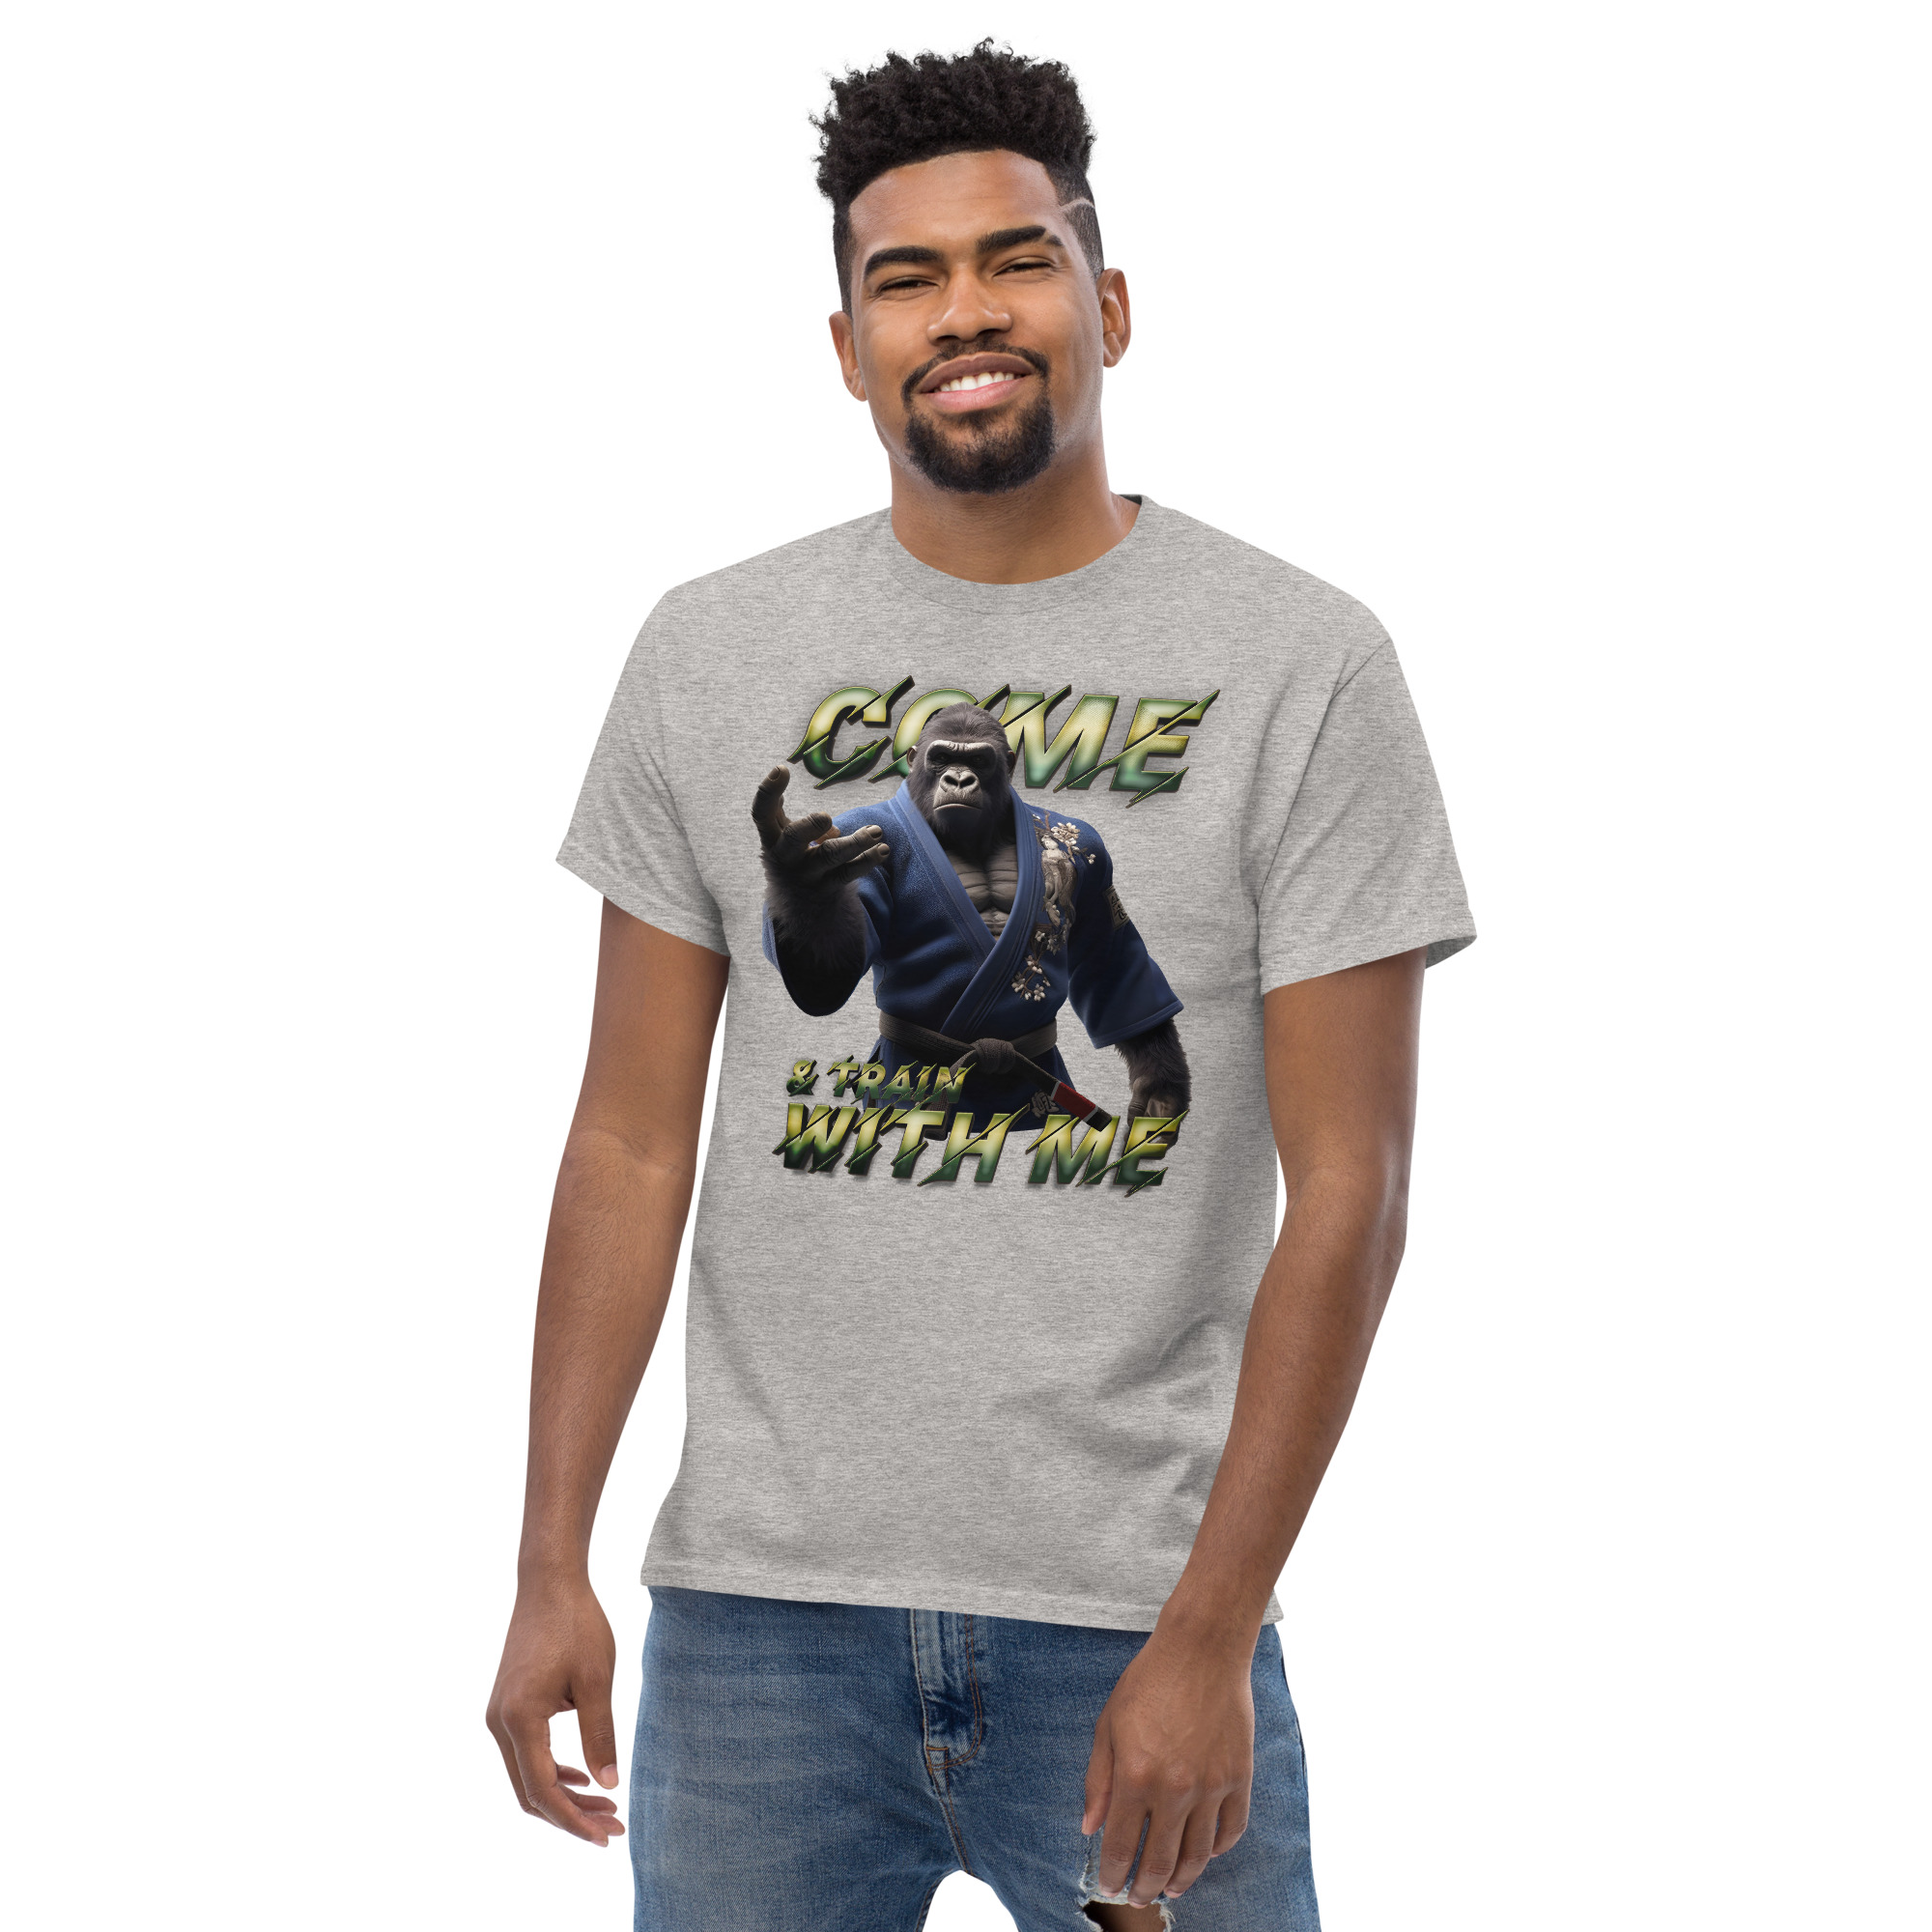 Black Belt Gorilla Challenge Tee: Inviting You to Roll 18